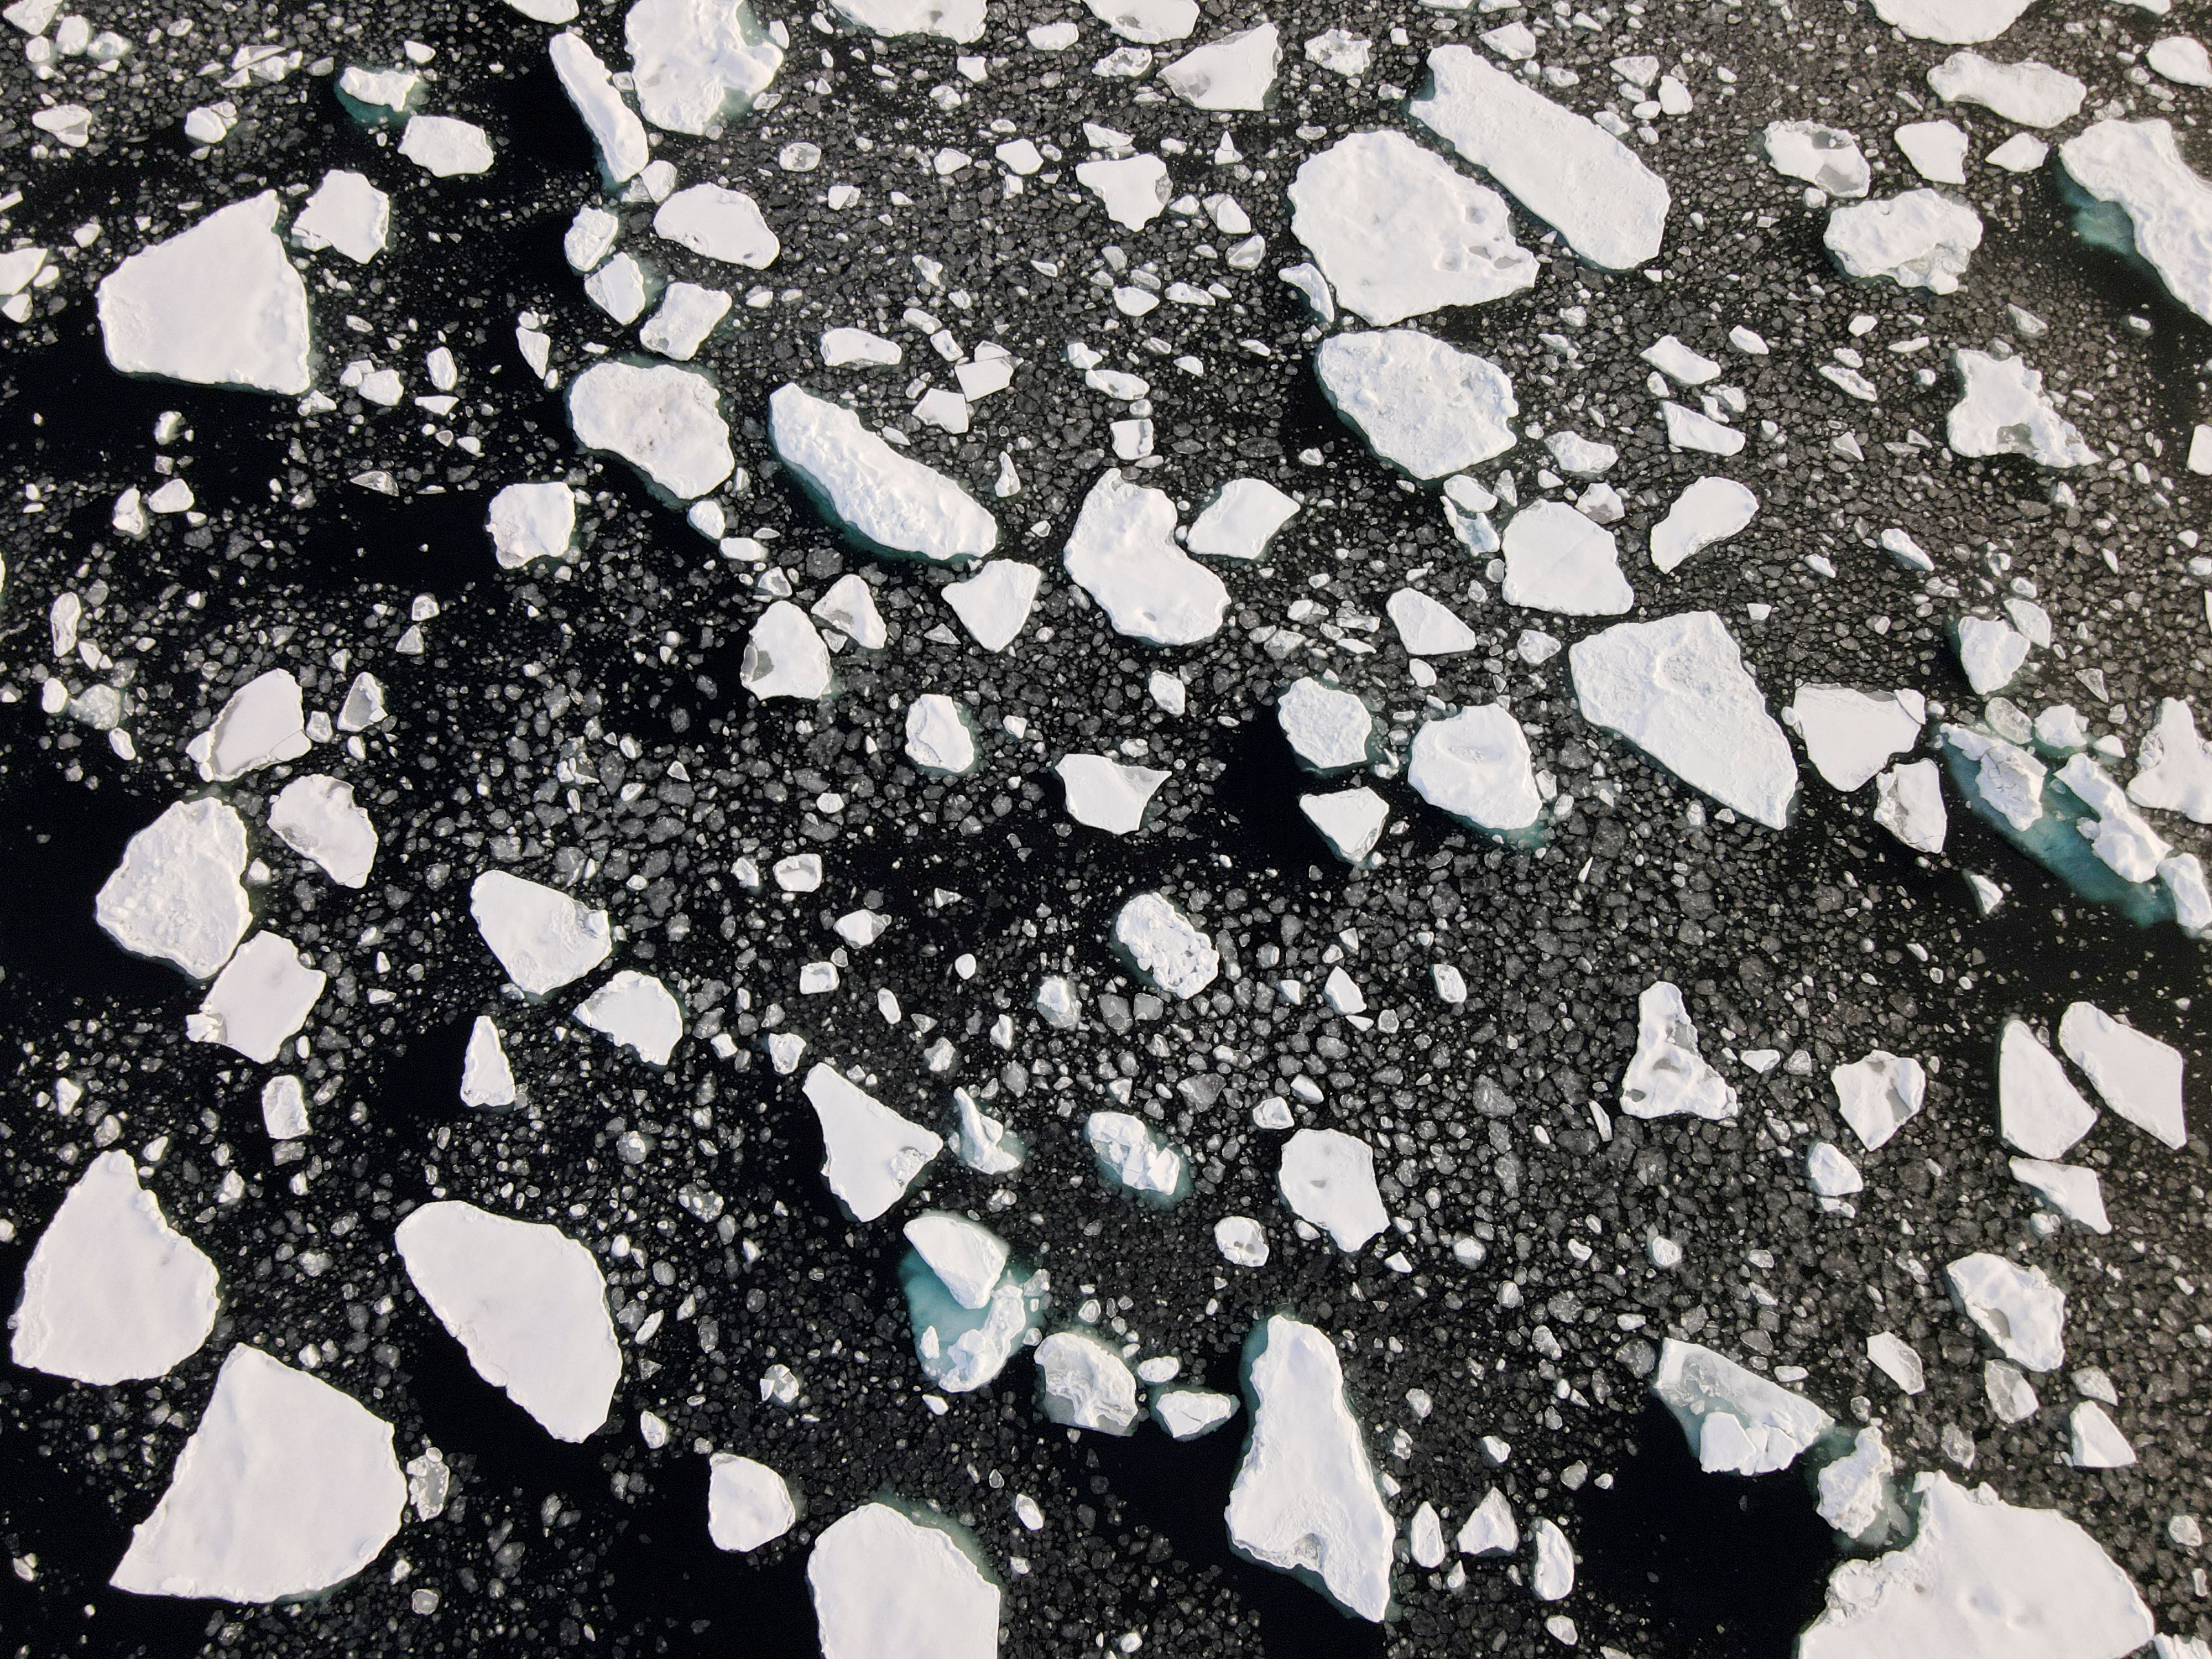 An aerial view of floating ice in the Arctic Ocean